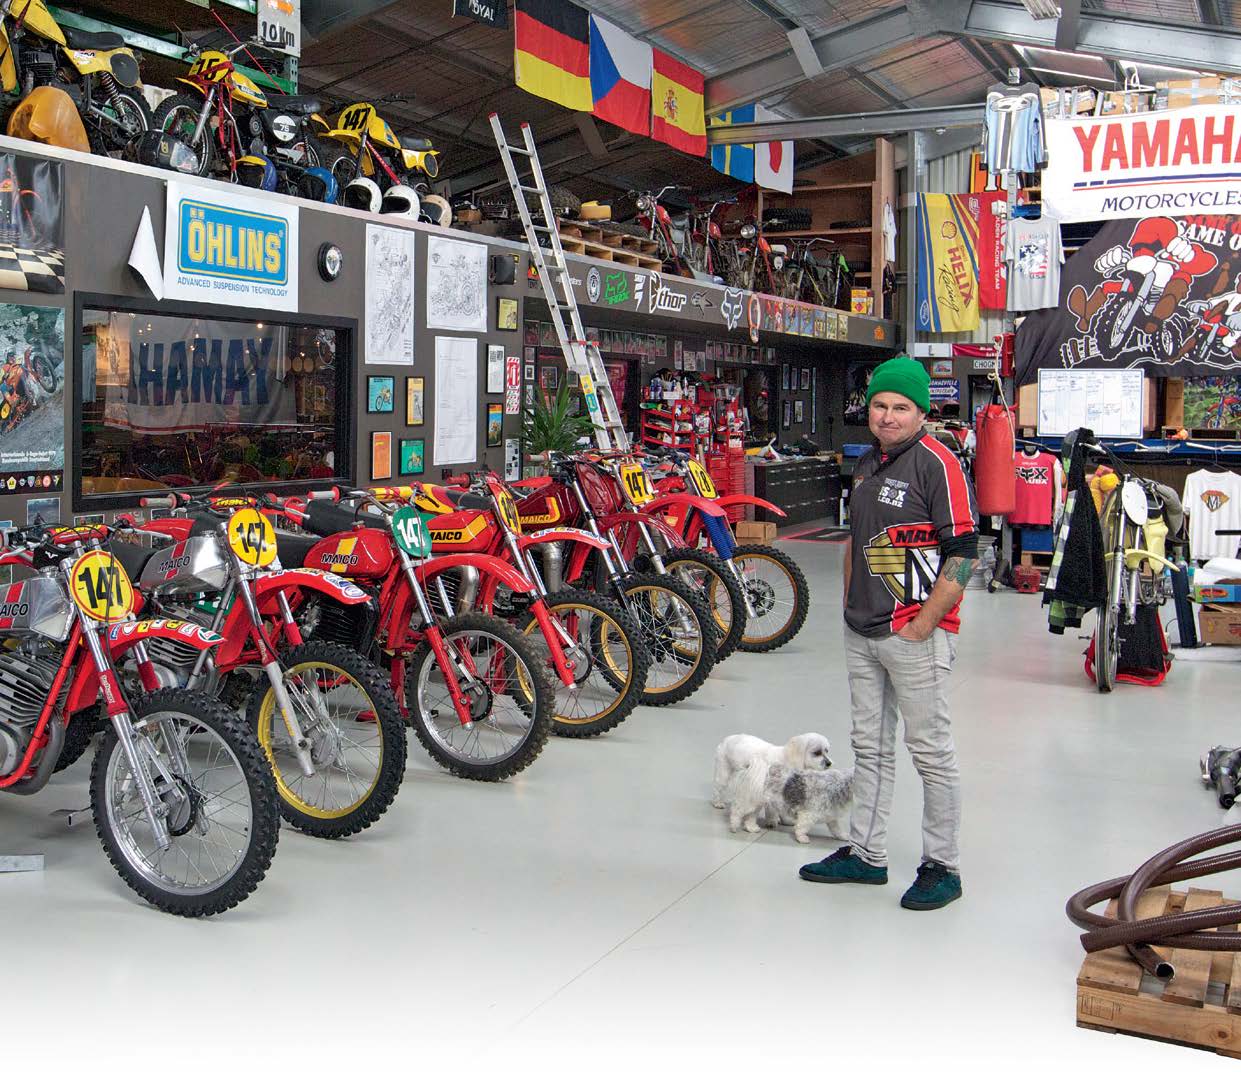 Steve Gallichan and his collection of vintage Maico bikes. Maltese cross pets Alfie and Bellain attendance.